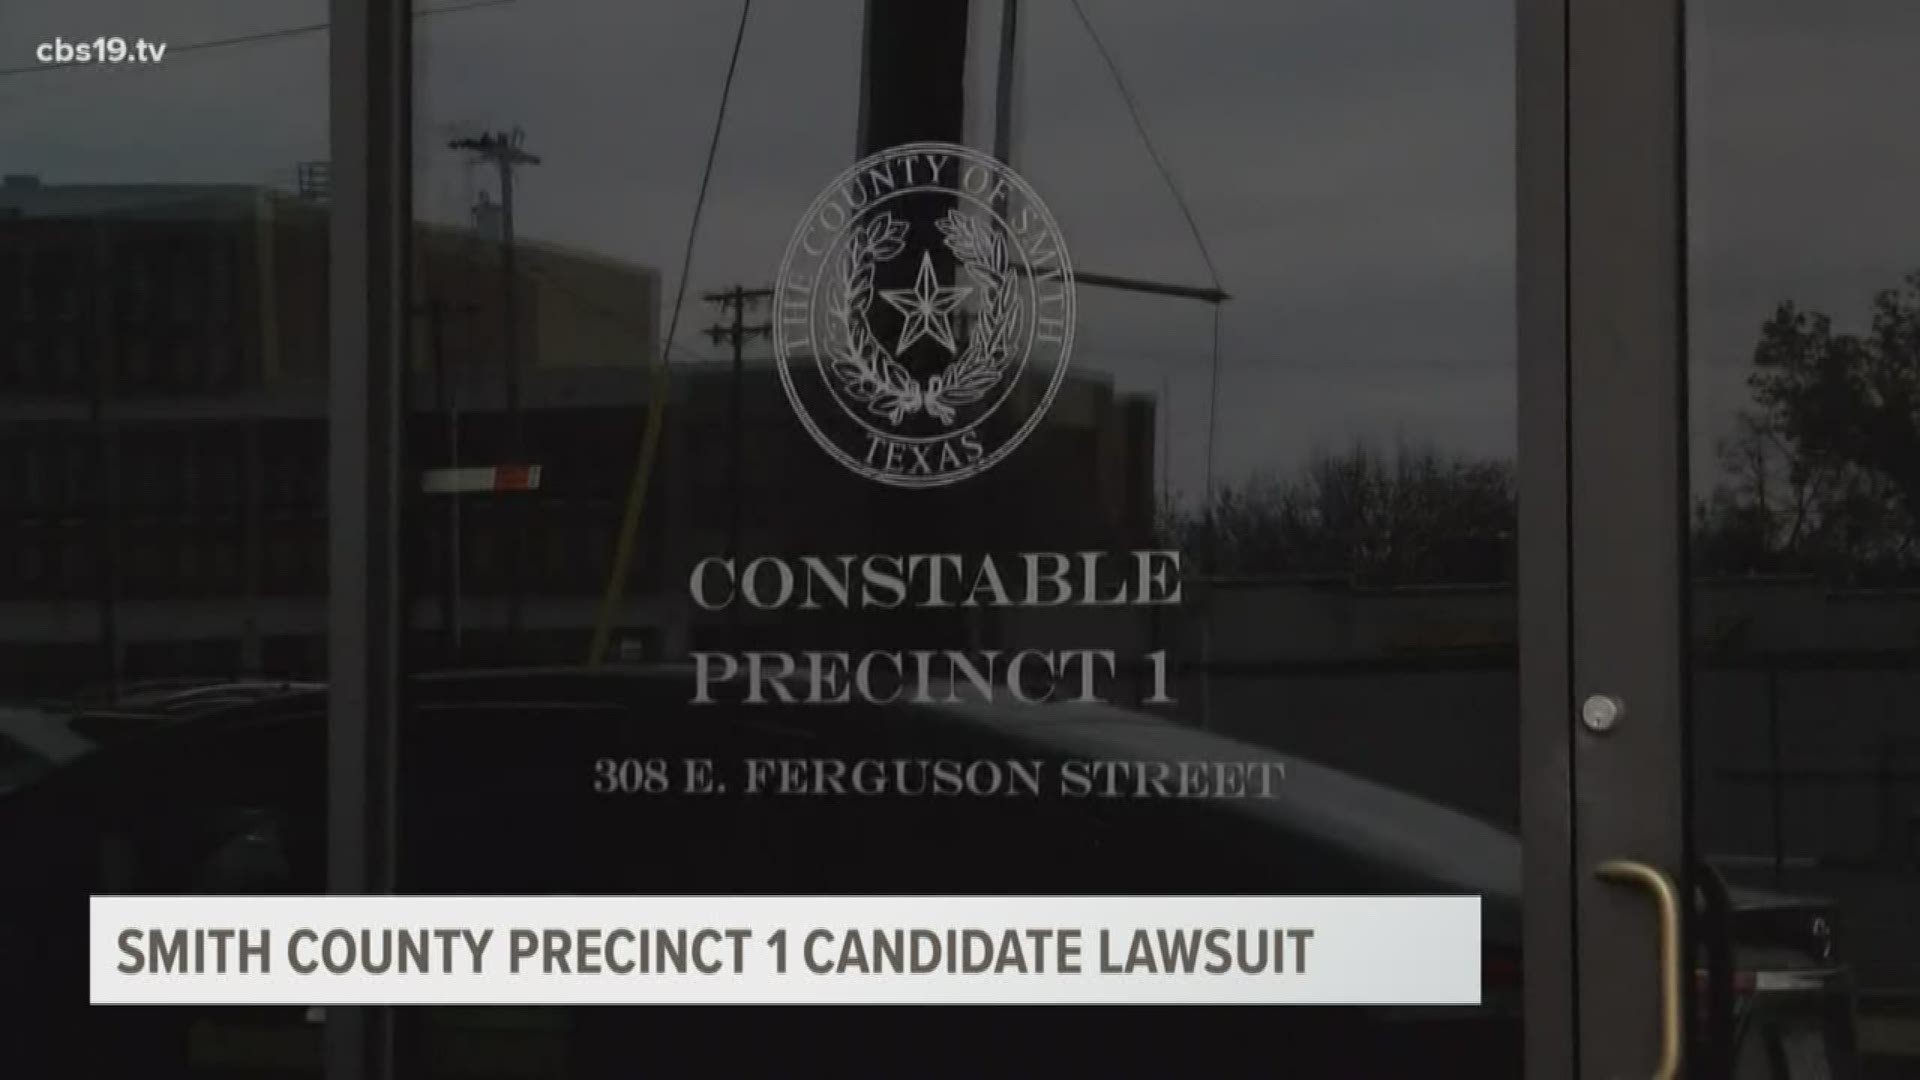 A lawsuit has been denied by the Texas Supreme Court alleging that one of the Pct. 1 Constable candidates failed to meet legal requirements for the March ballot.